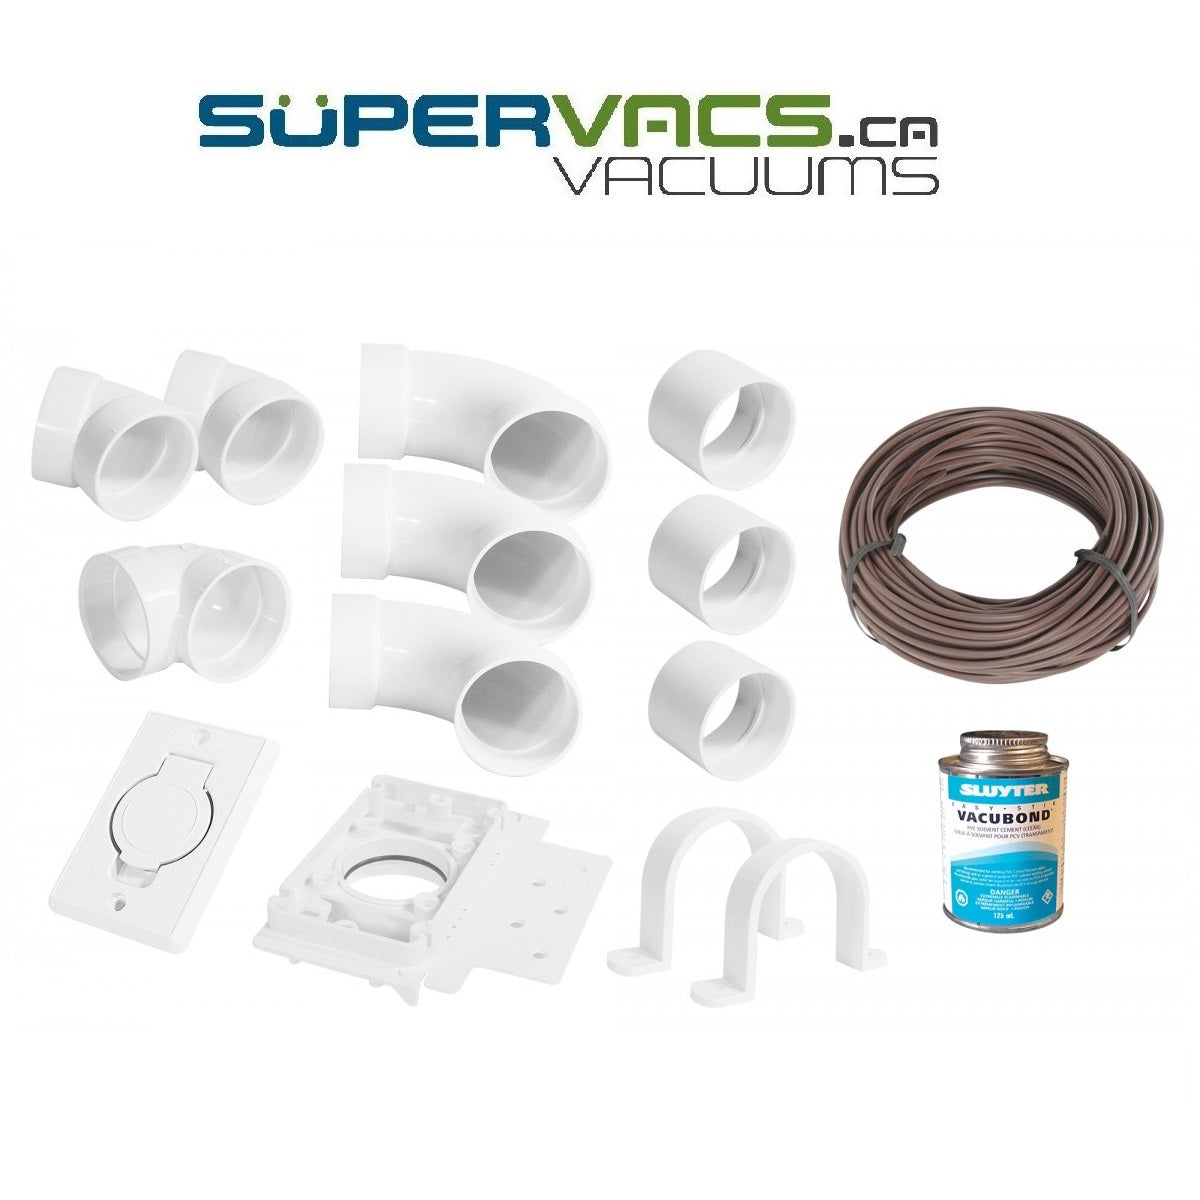 Installation Kit for Central Vacuum - 1 Inlet - with Accessories - Super Vacs